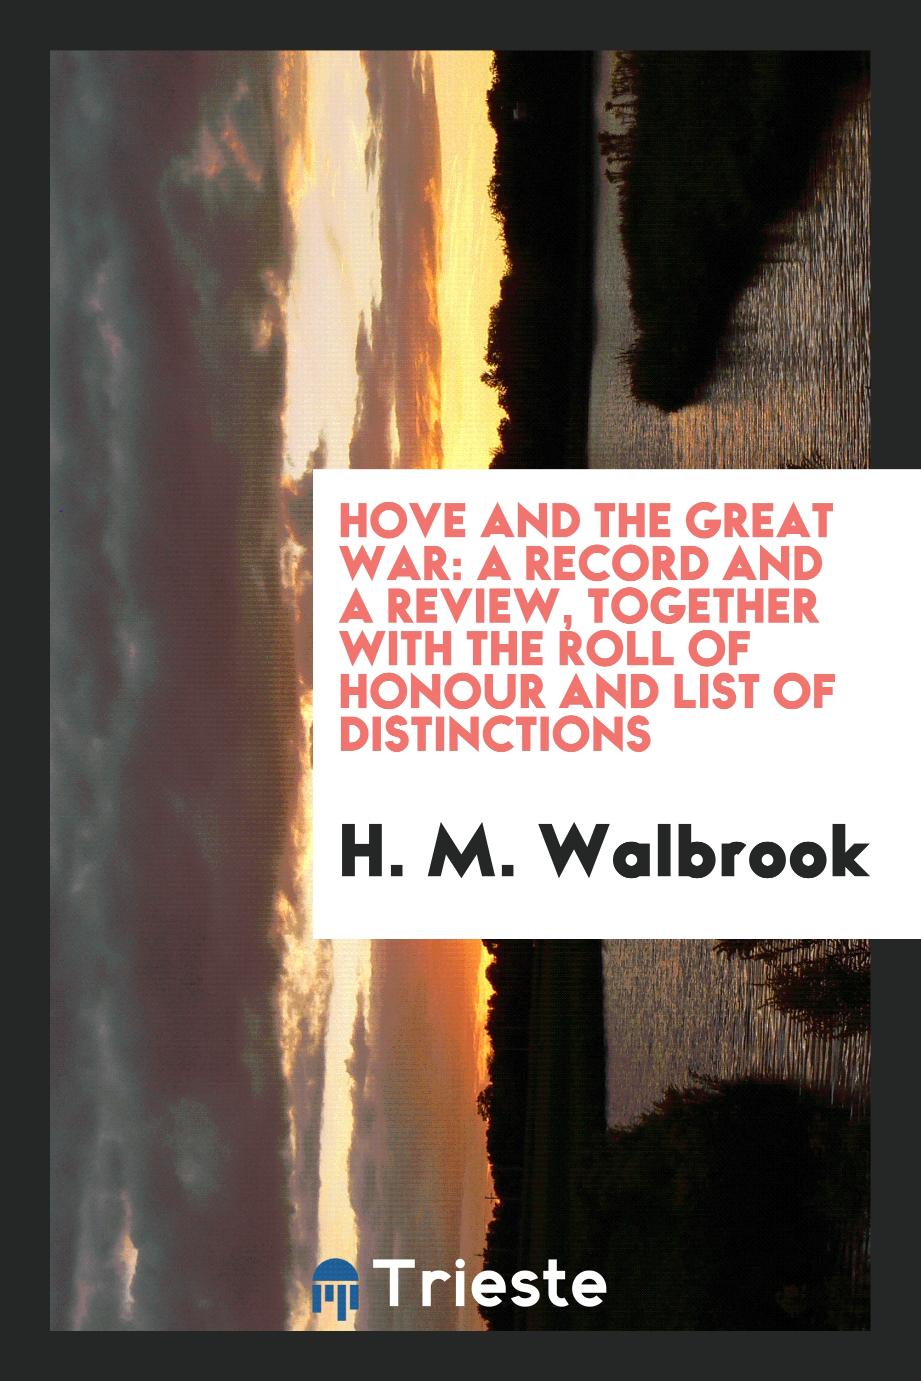 Hove and the great war: a record and a review, together with the roll of honour and list of distinctions